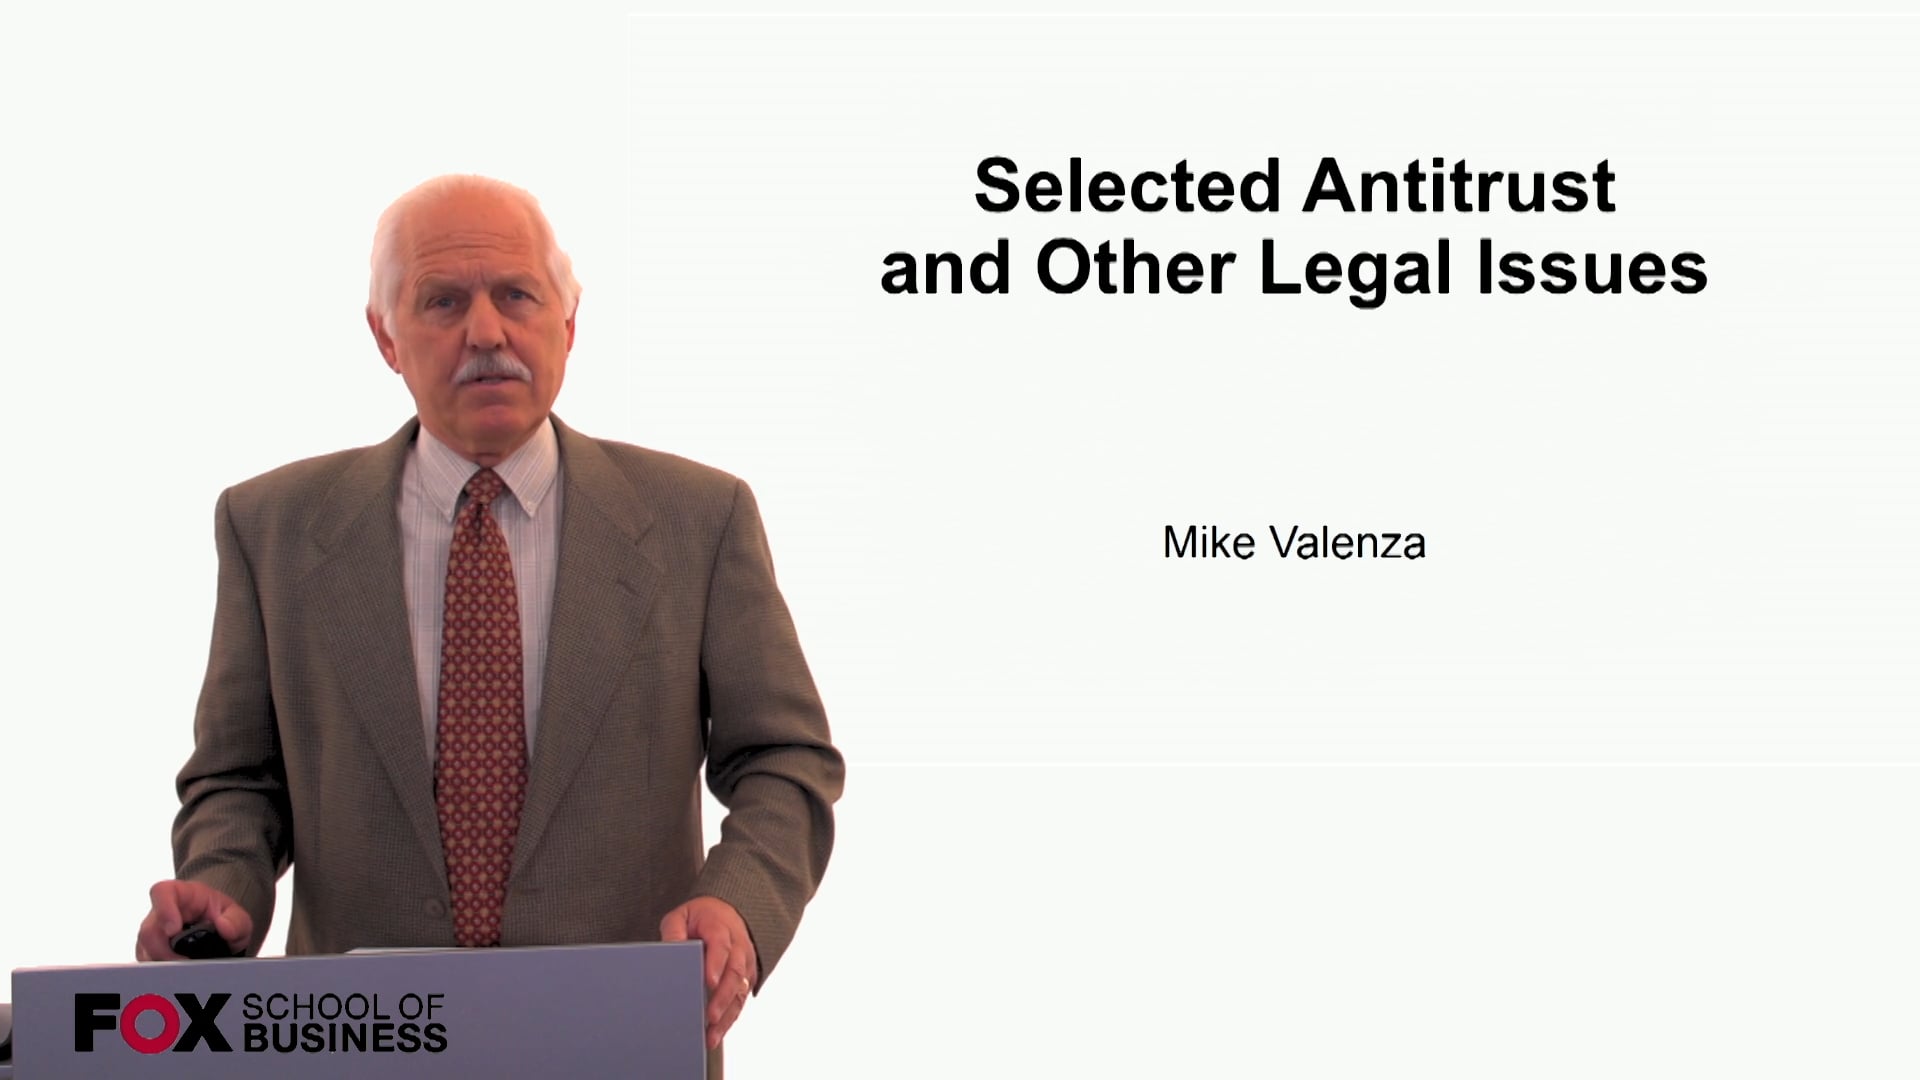 Selected Antitrust and Other Legal Issues